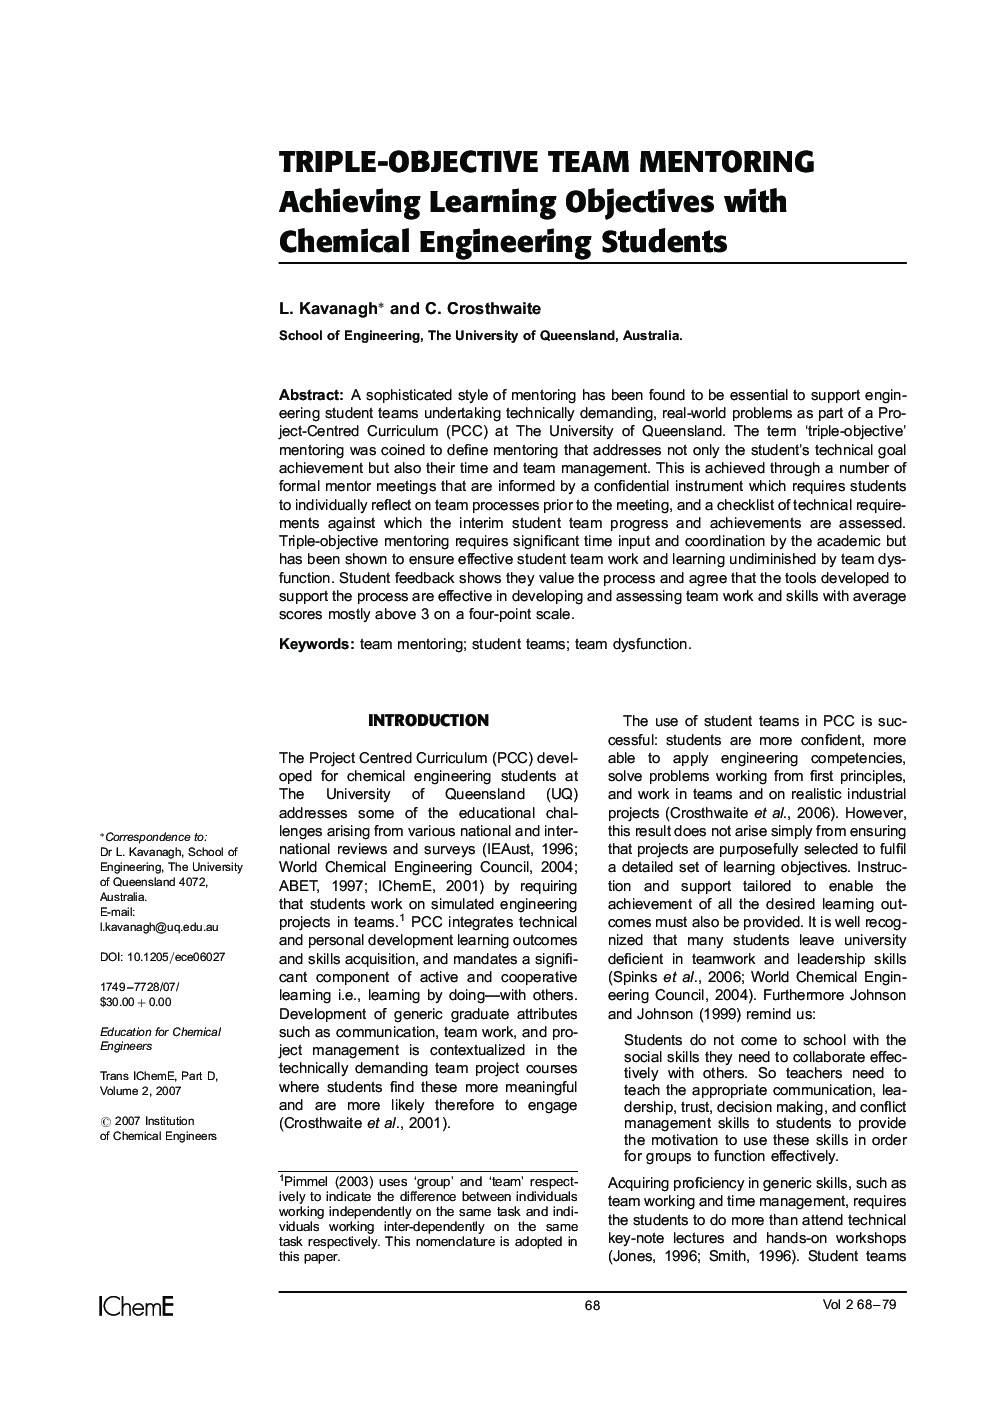 Triple-objective Team Mentoring: Achieving Learning Objectives with Chemical Engineering Students